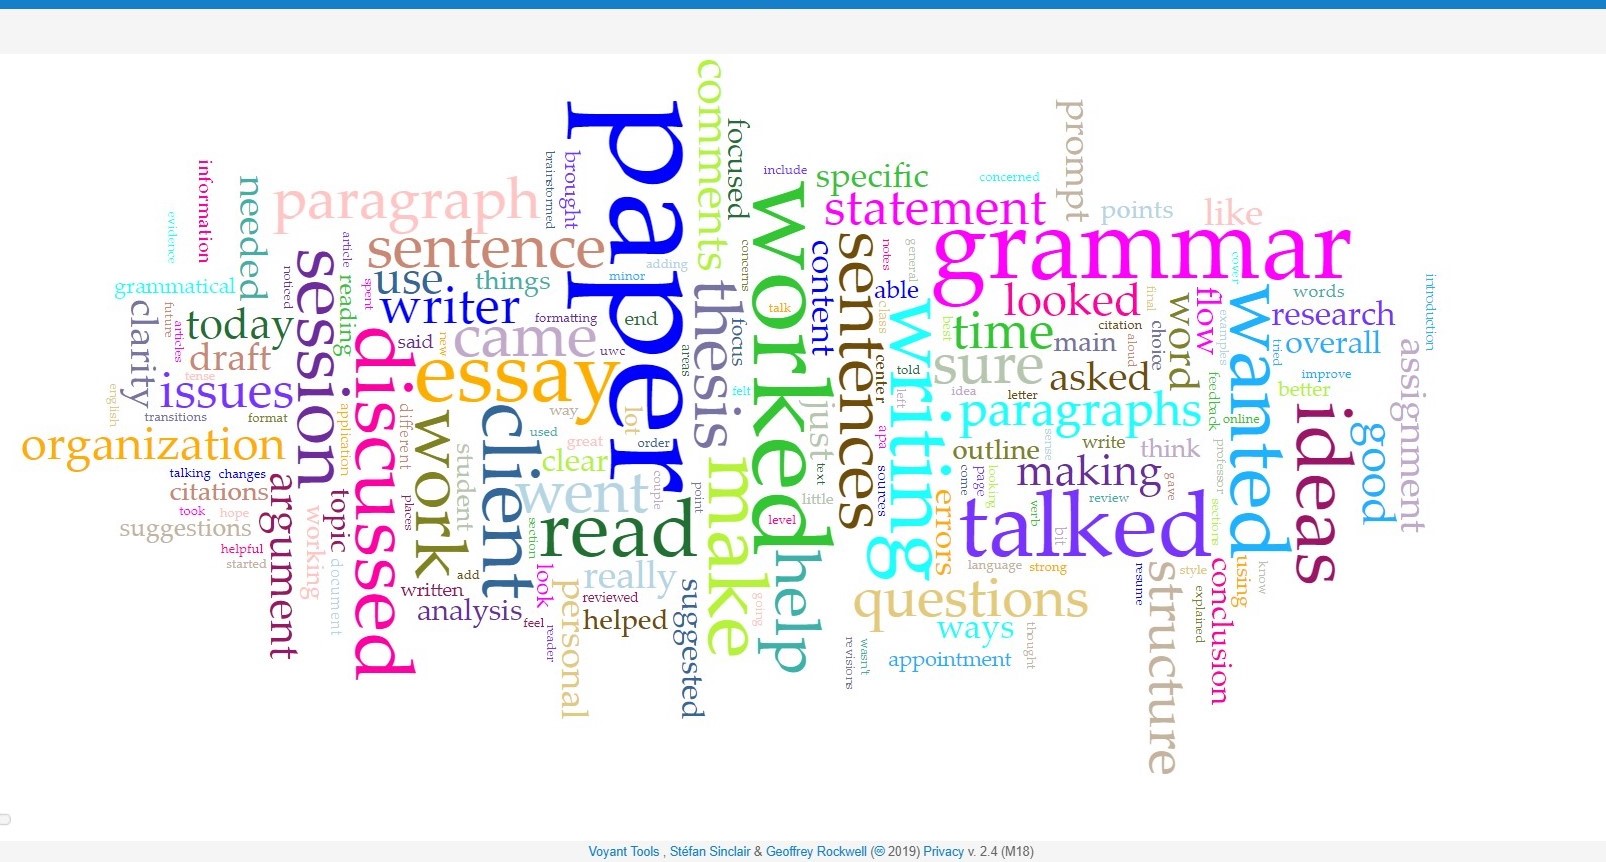 A word cloud containing 175 words, such as paper and grammar